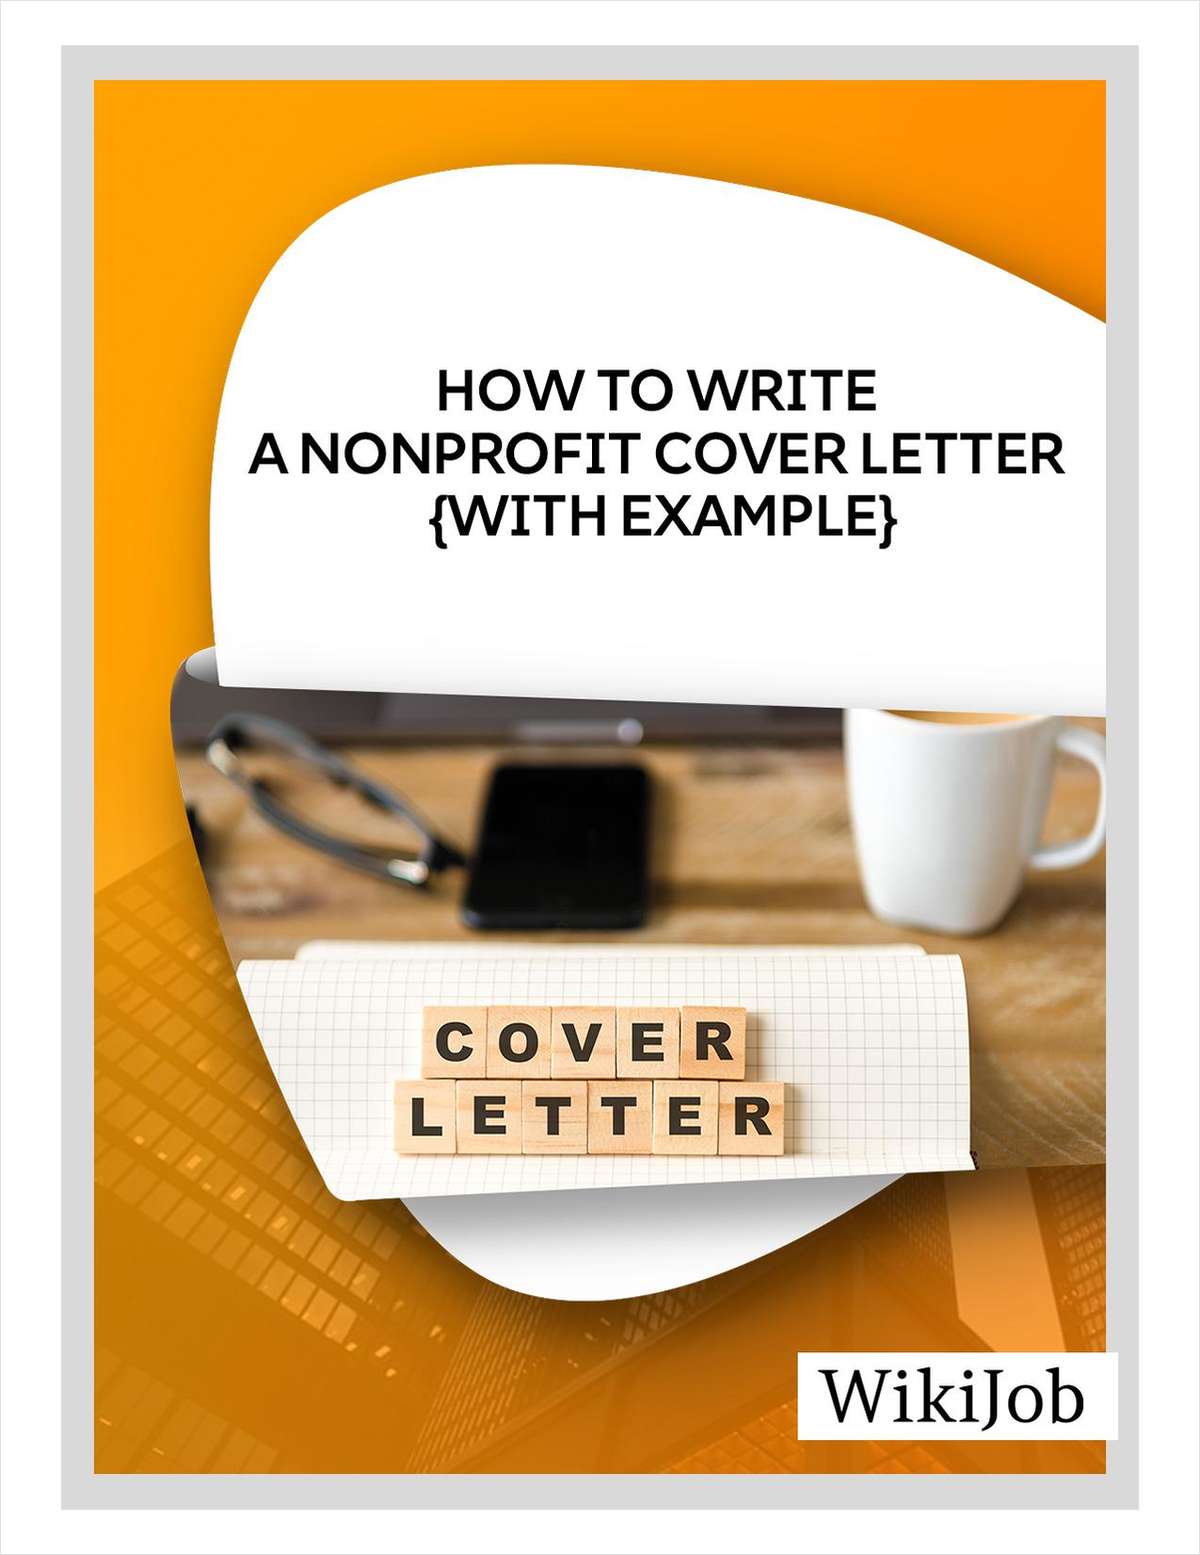 How to Write a Nonprofit Cover Letter (Template and Example)